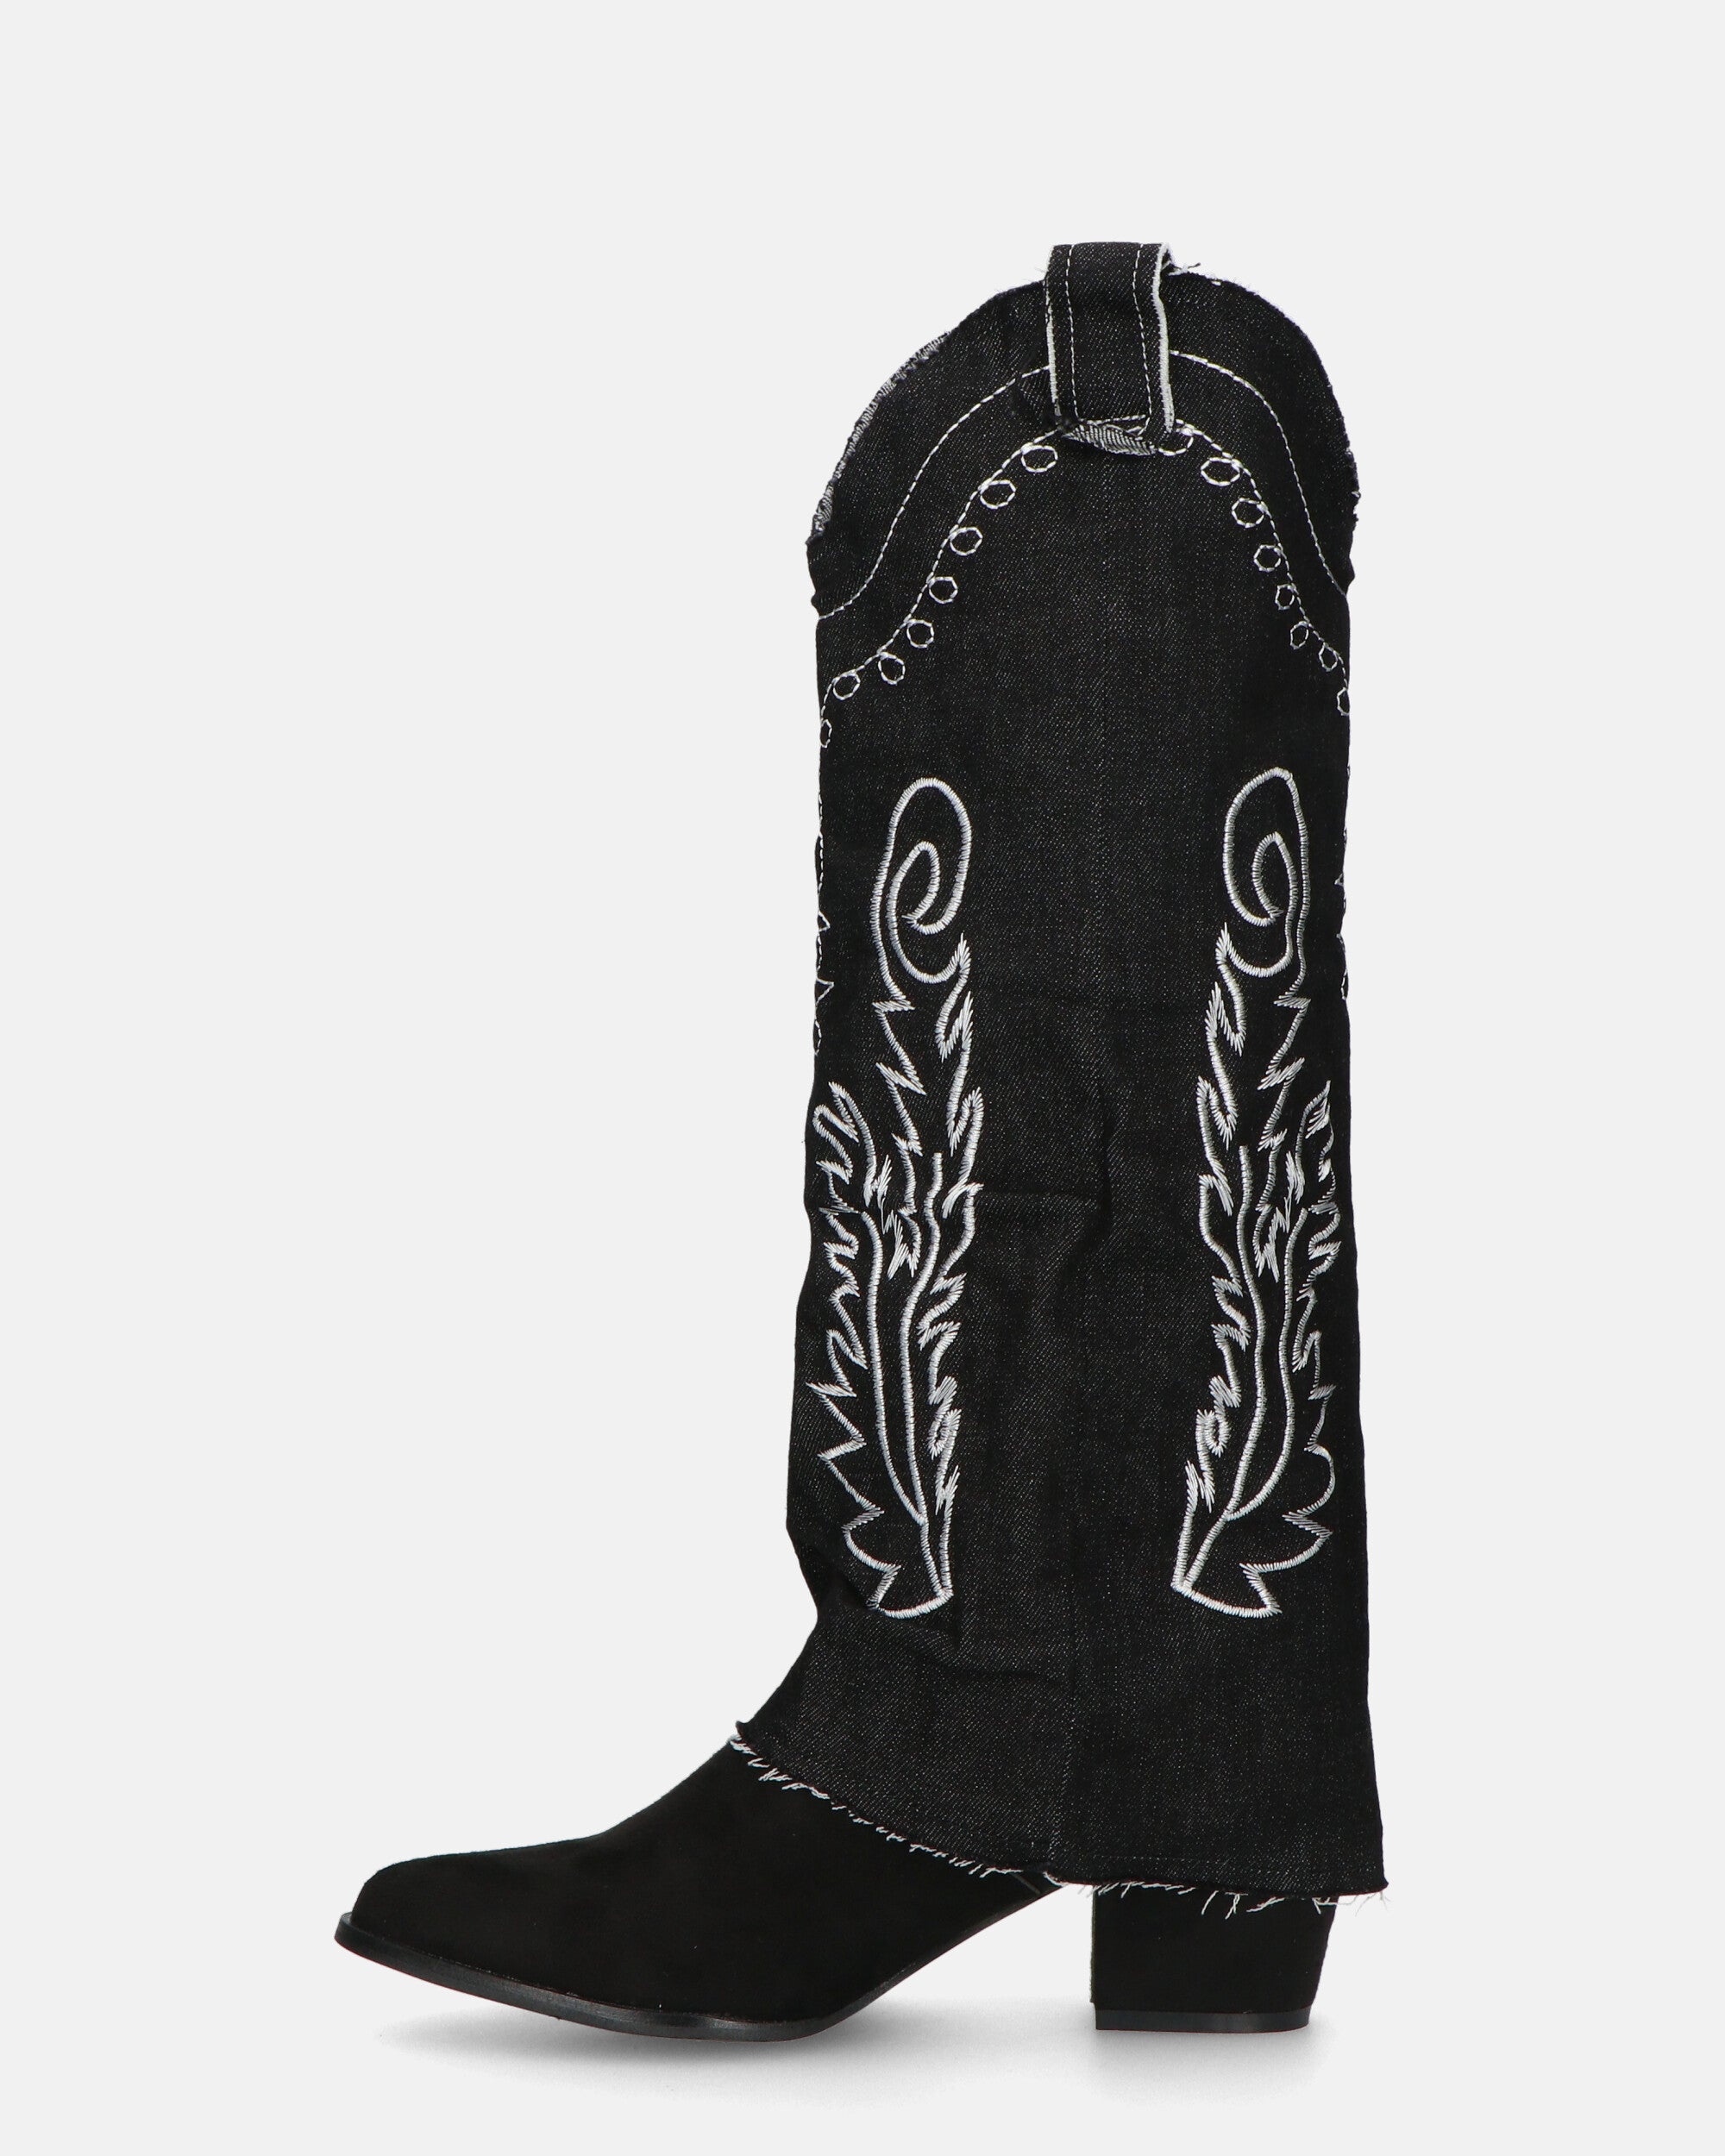 FRANCYS - high camper boots in black denim fabric with embroidery